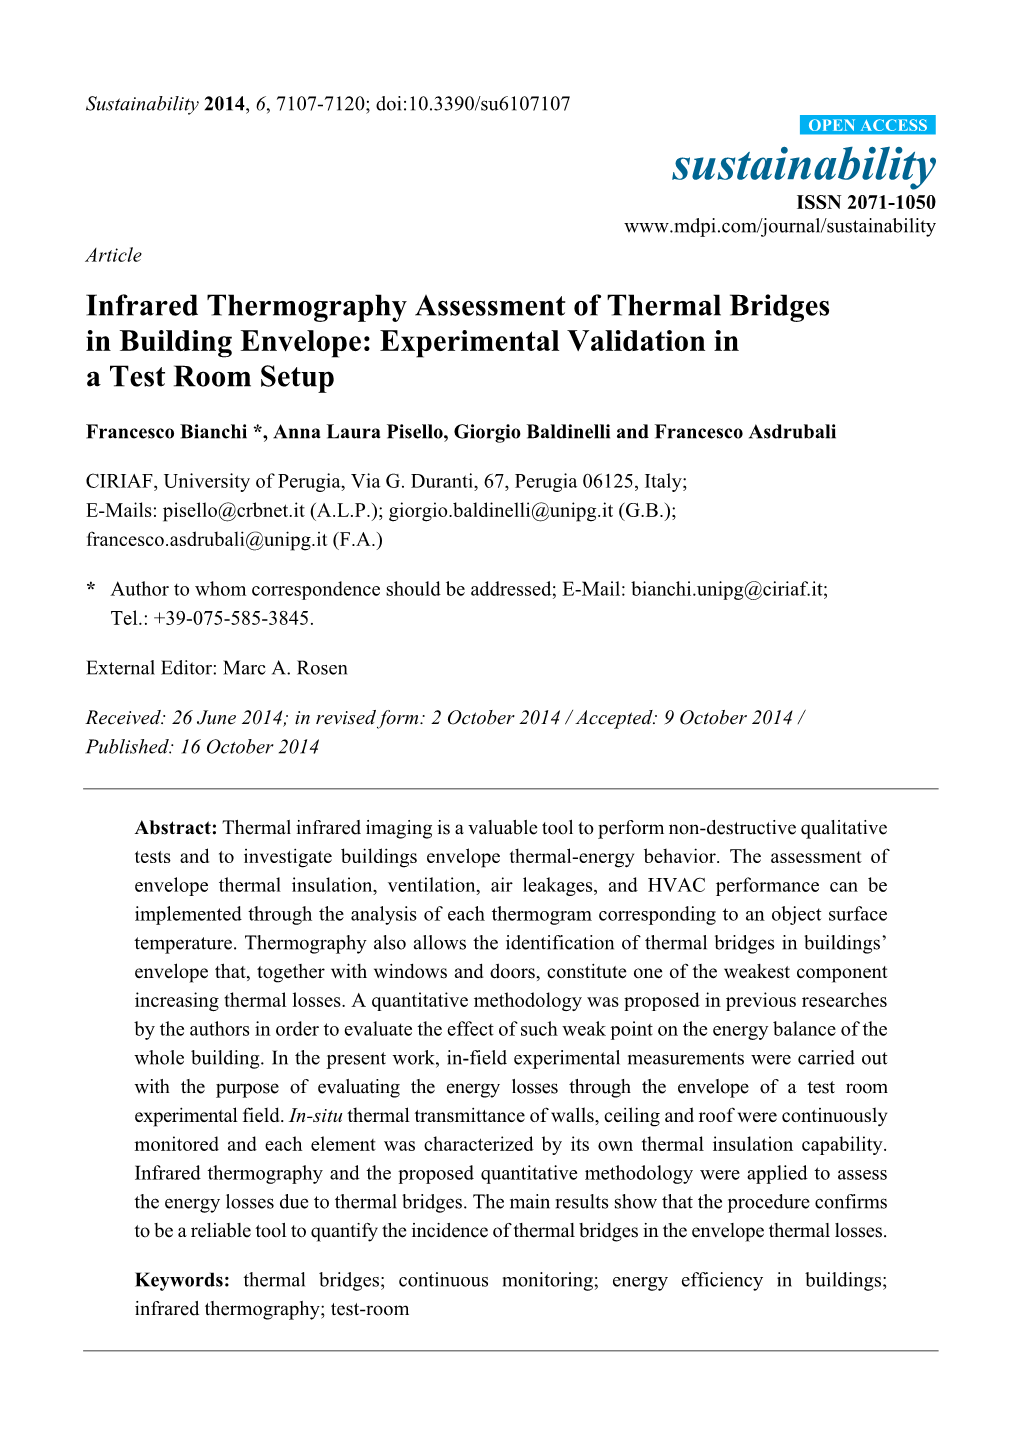 Infrared Thermography Assessment of Thermal Bridges in Building Envelope: Experimental Validation in a Test Room Setup